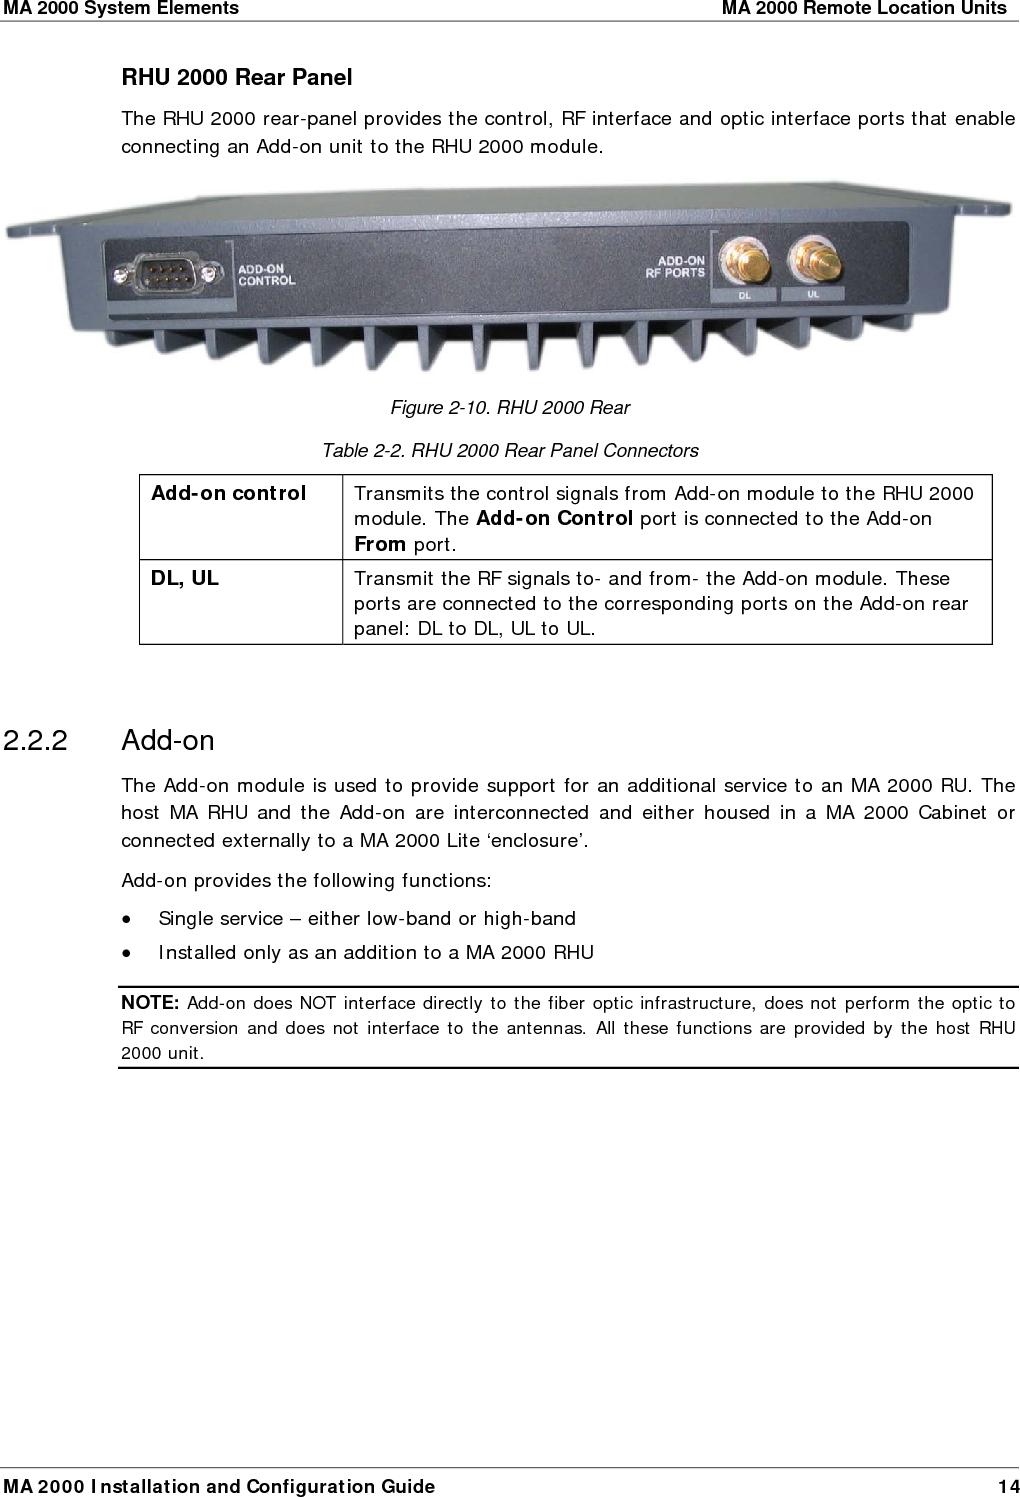 MA 2000 System Elements    MA 2000 Remote Location Units  MA 2000 Installation and Configuration Guide  14 RHU 2000 Rear Panel The RHU 2000 rear-panel provides the control, RF interface and optic interface ports that enable connecting an Add-on unit to the RHU 2000 module.   Figure  2-10. RHU 2000 Rear Table  2-2. RHU 2000 Rear Panel Connectors Add-on control  Transmits the control signals from Add-on module to the RHU 2000 module. The Add-on Control port is connected to the Add-on From port.  DL, UL  Transmit the RF signals to- and from- the Add-on module. These ports are connected to the corresponding ports on the Add-on rear panel: DL to DL, UL to UL.  2.2.2 Add-on The Add-on module is used to provide support for an additional service to an MA 2000 RU. The host MA RHU and the Add-on are interconnected and either housed in a MA 2000 Cabinet or connected externally to a MA 2000 Lite ‘enclosure’.  Add-on provides the following functions: • Single service – either low-band or high-band • Installed only as an addition to a MA 2000 RHU NOTE: Add-on does NOT interface directly to the fiber optic infrastructure, does not perform the optic to RF conversion and does not interface to the antennas. All these functions are provided by the host RHU 2000 unit.  